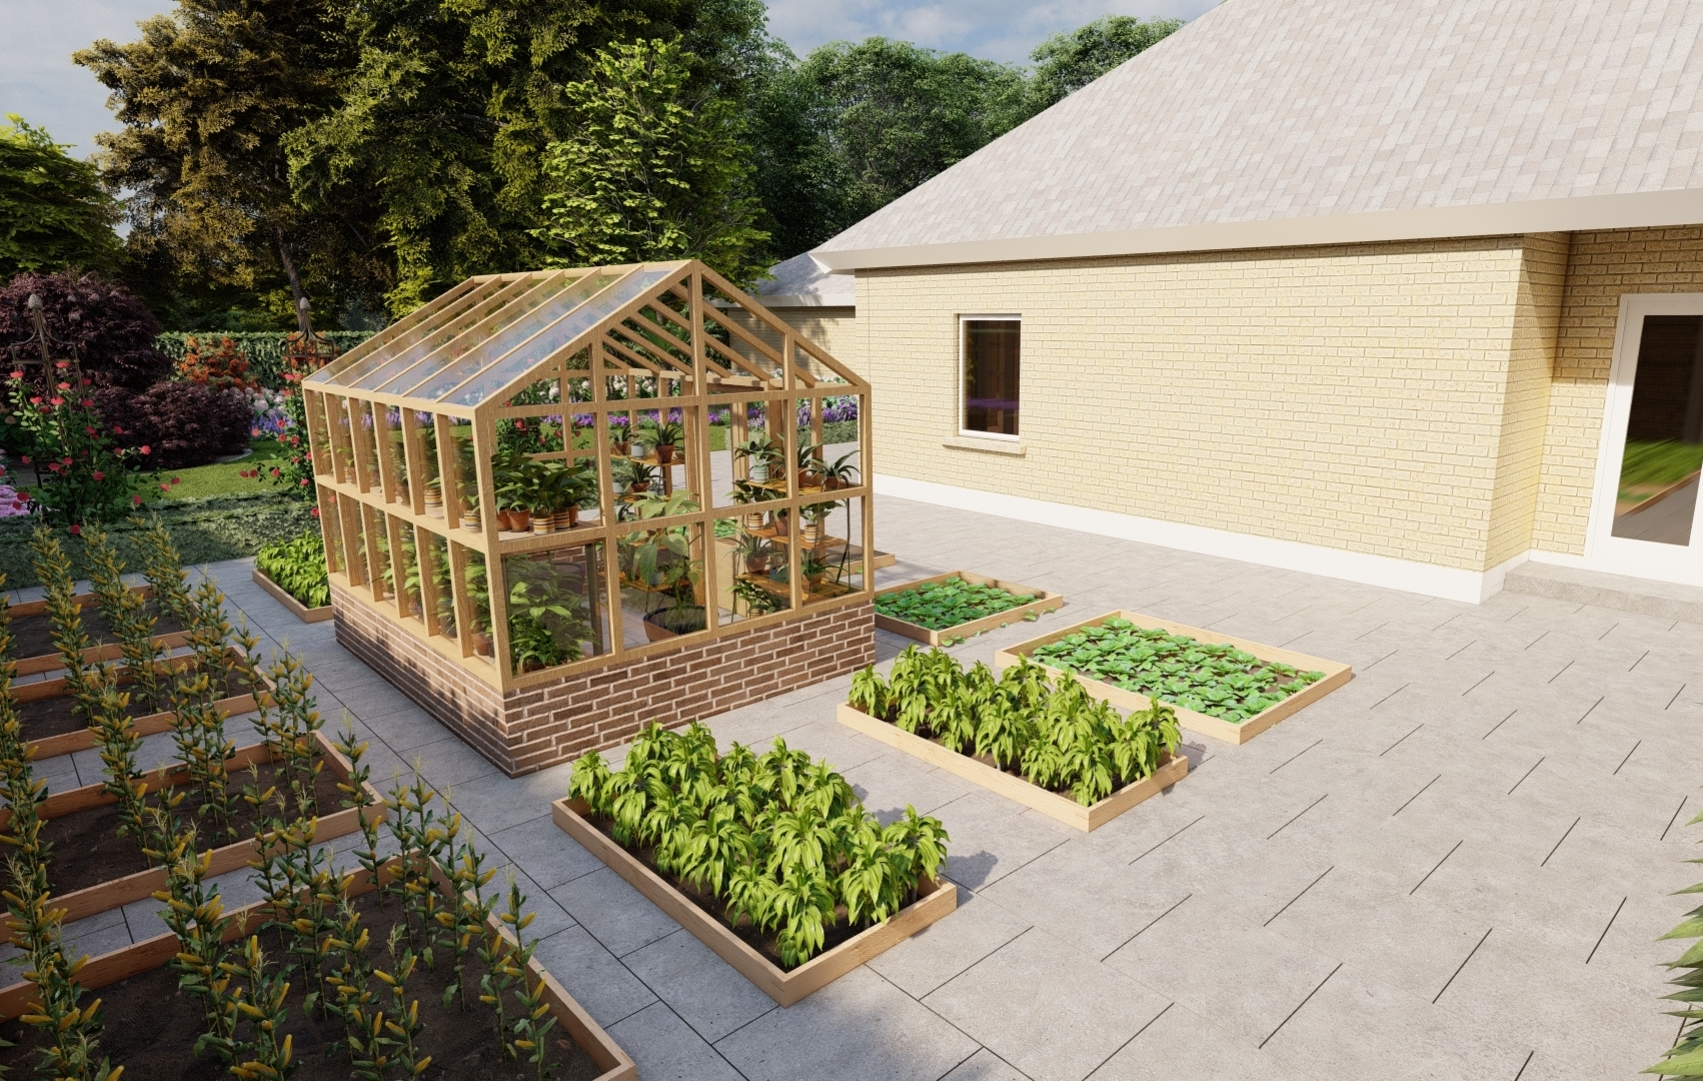 The stunning Greenhouse is the centrepiece in  the Kitchen Garden area with a generous selection of simple raised edged growing/planting beds